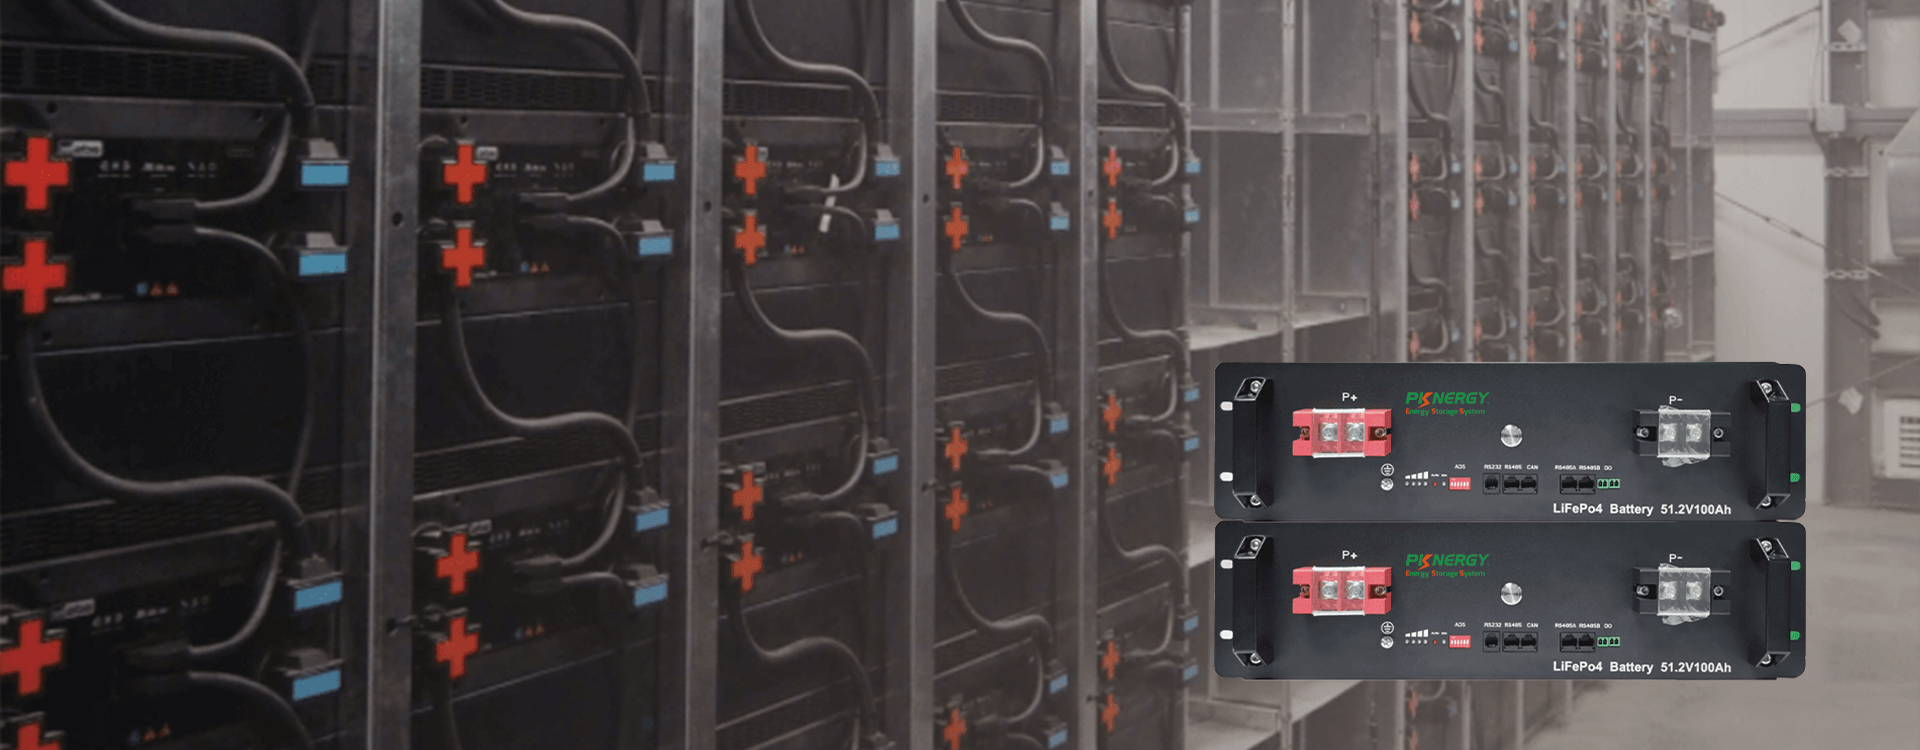 What are the benefits of setting up pknergy rack mount battery backup?